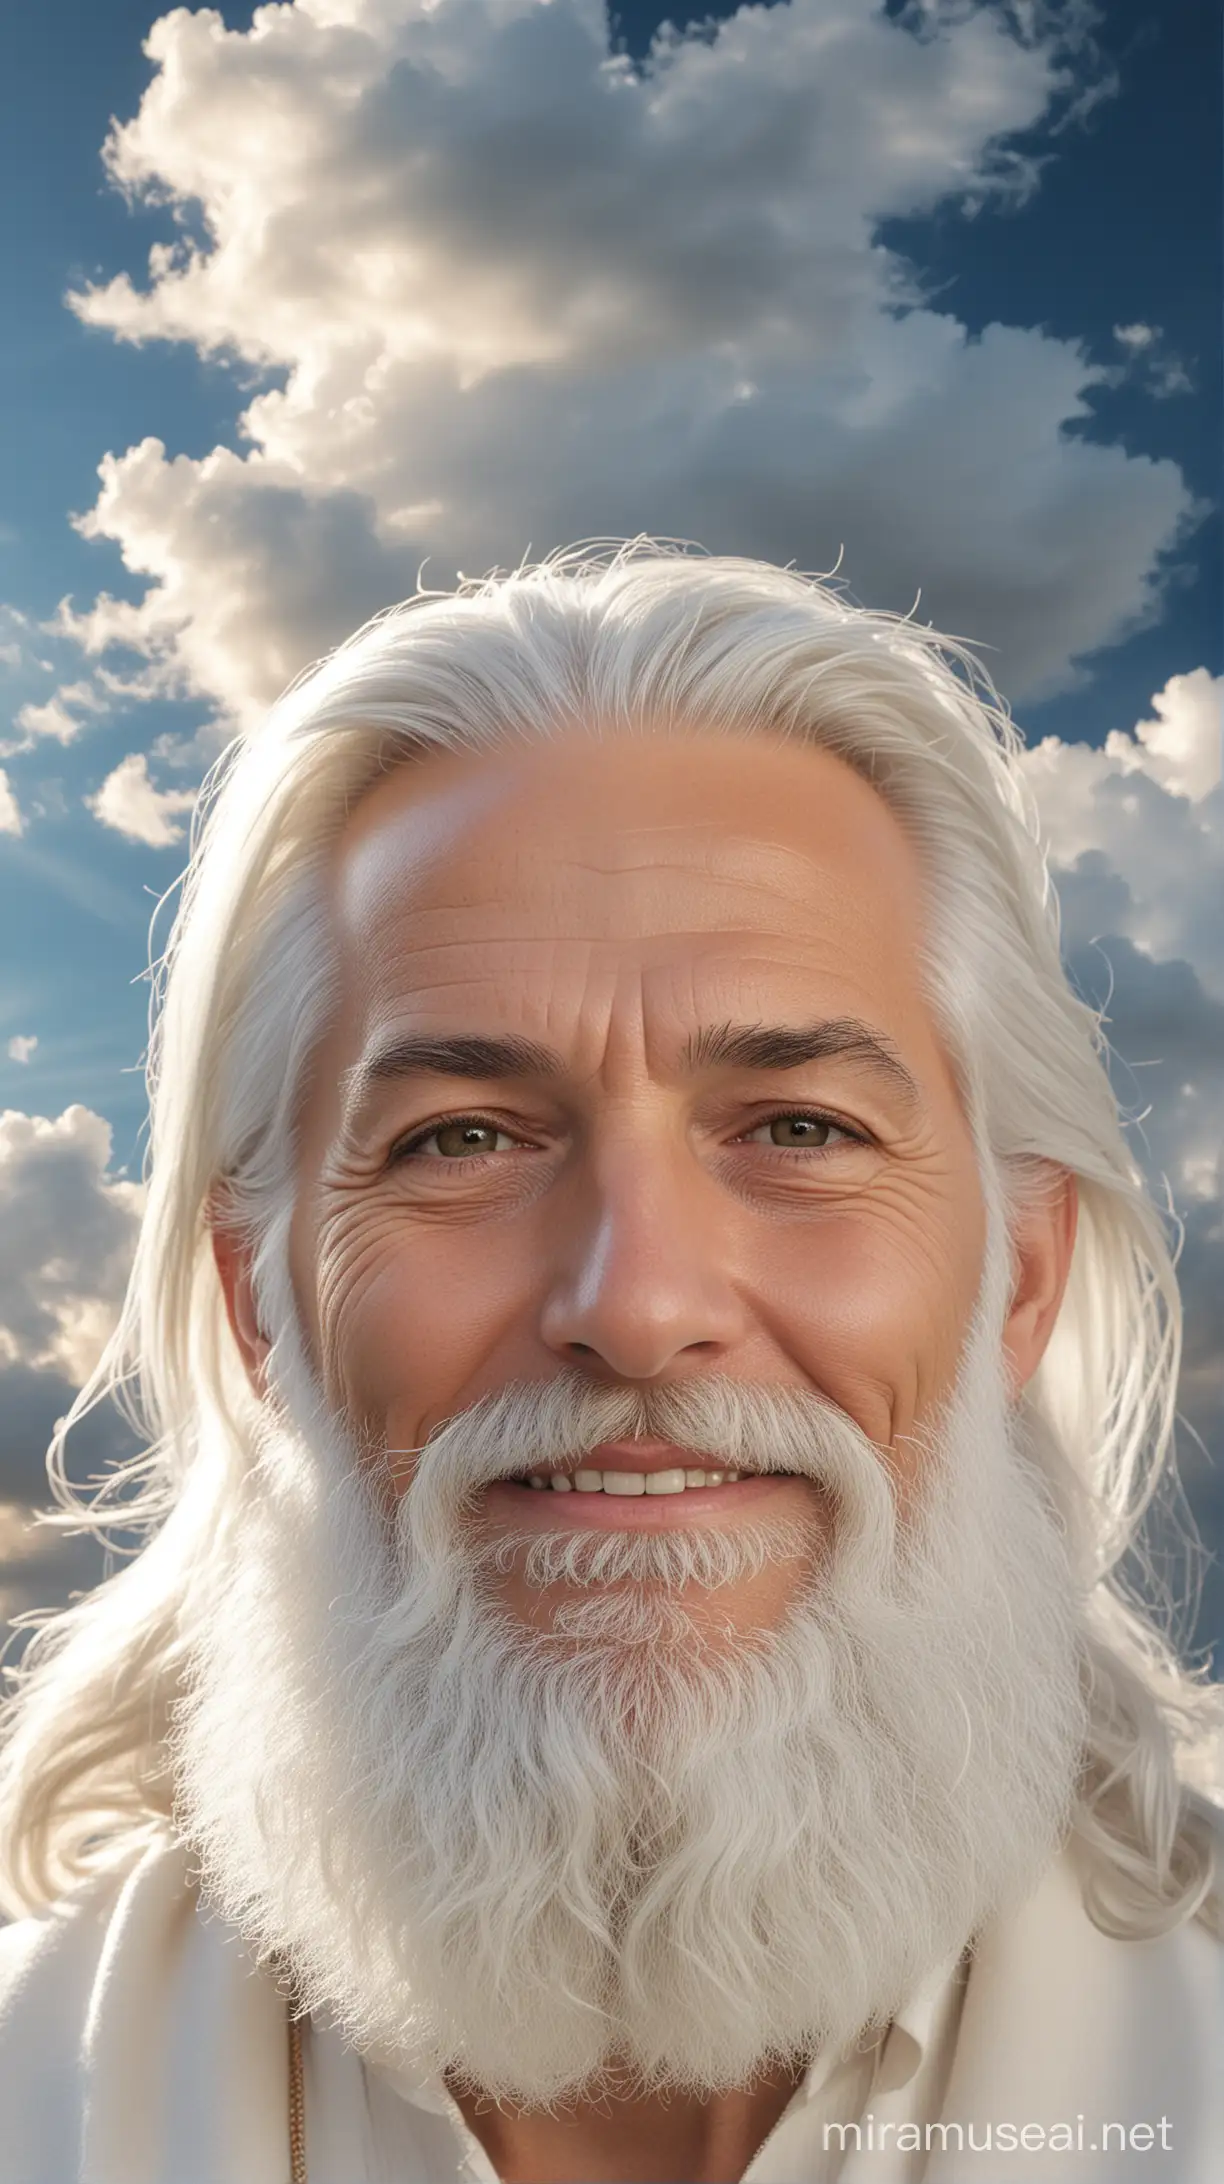 Majestic Divine Figure with Serene Smile and White Beard